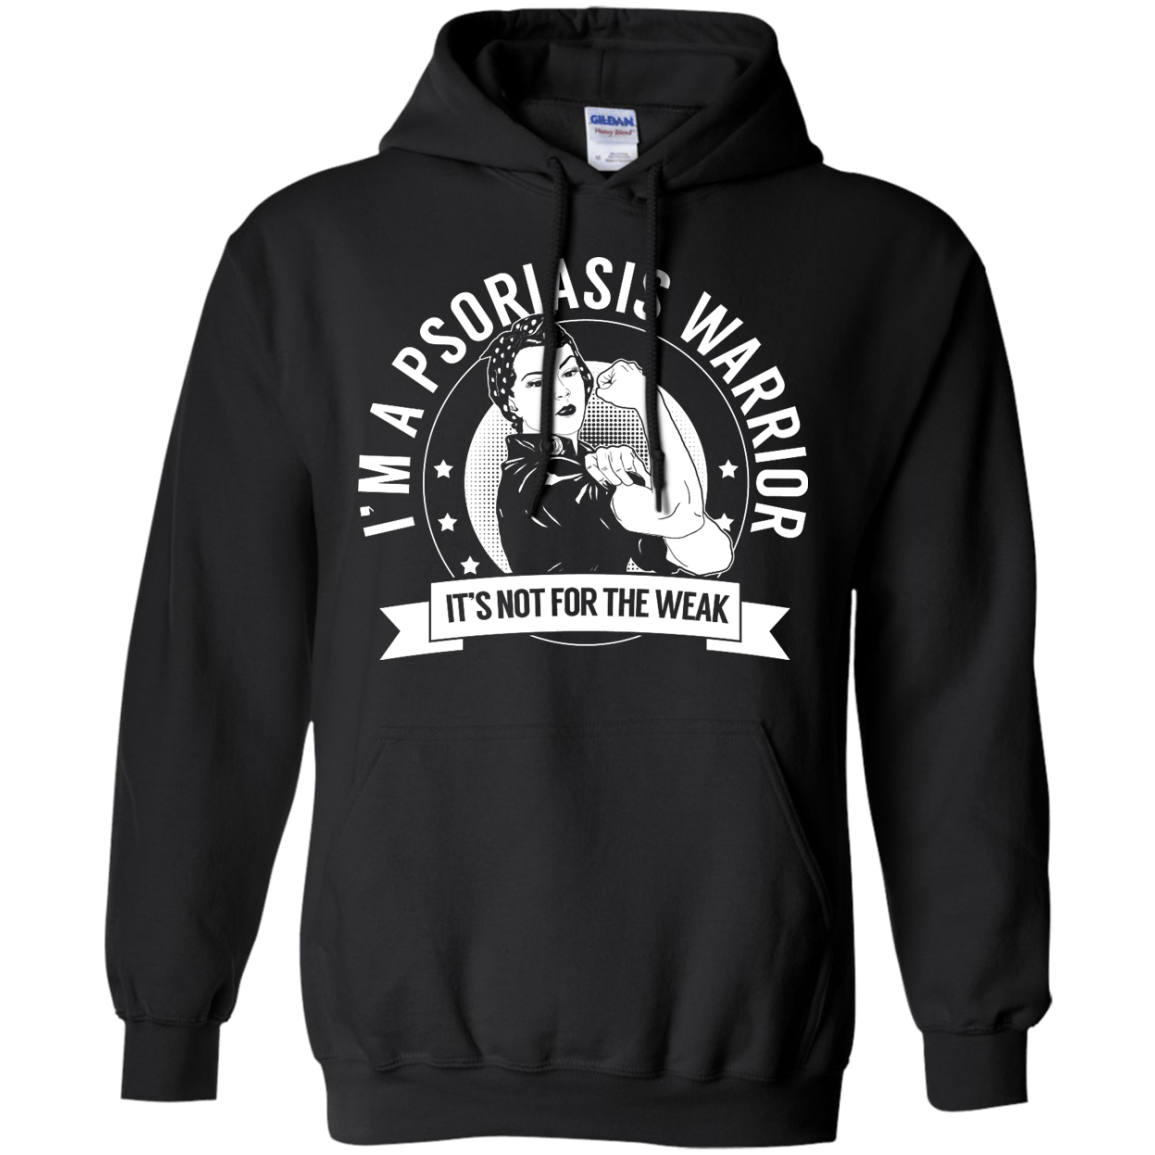 Psoriasis Warrior Not For The Weak Pullover Hoodie 8 oz - The Unchargeables